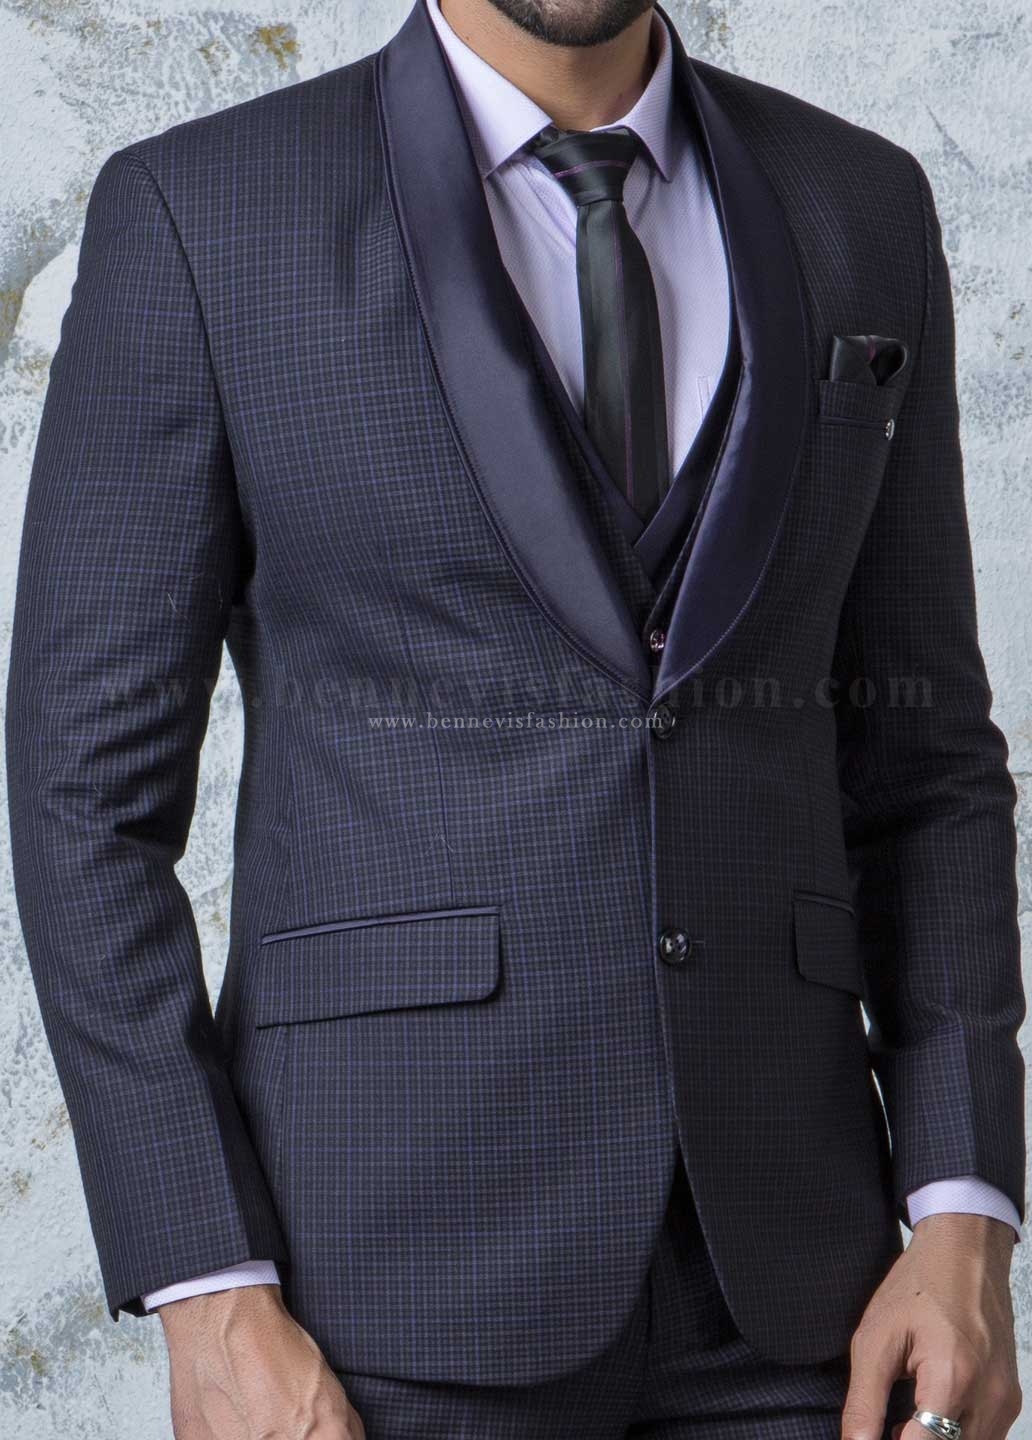 Purple Terry Rayon Checkered Mens Suit | Bennevis Fashion